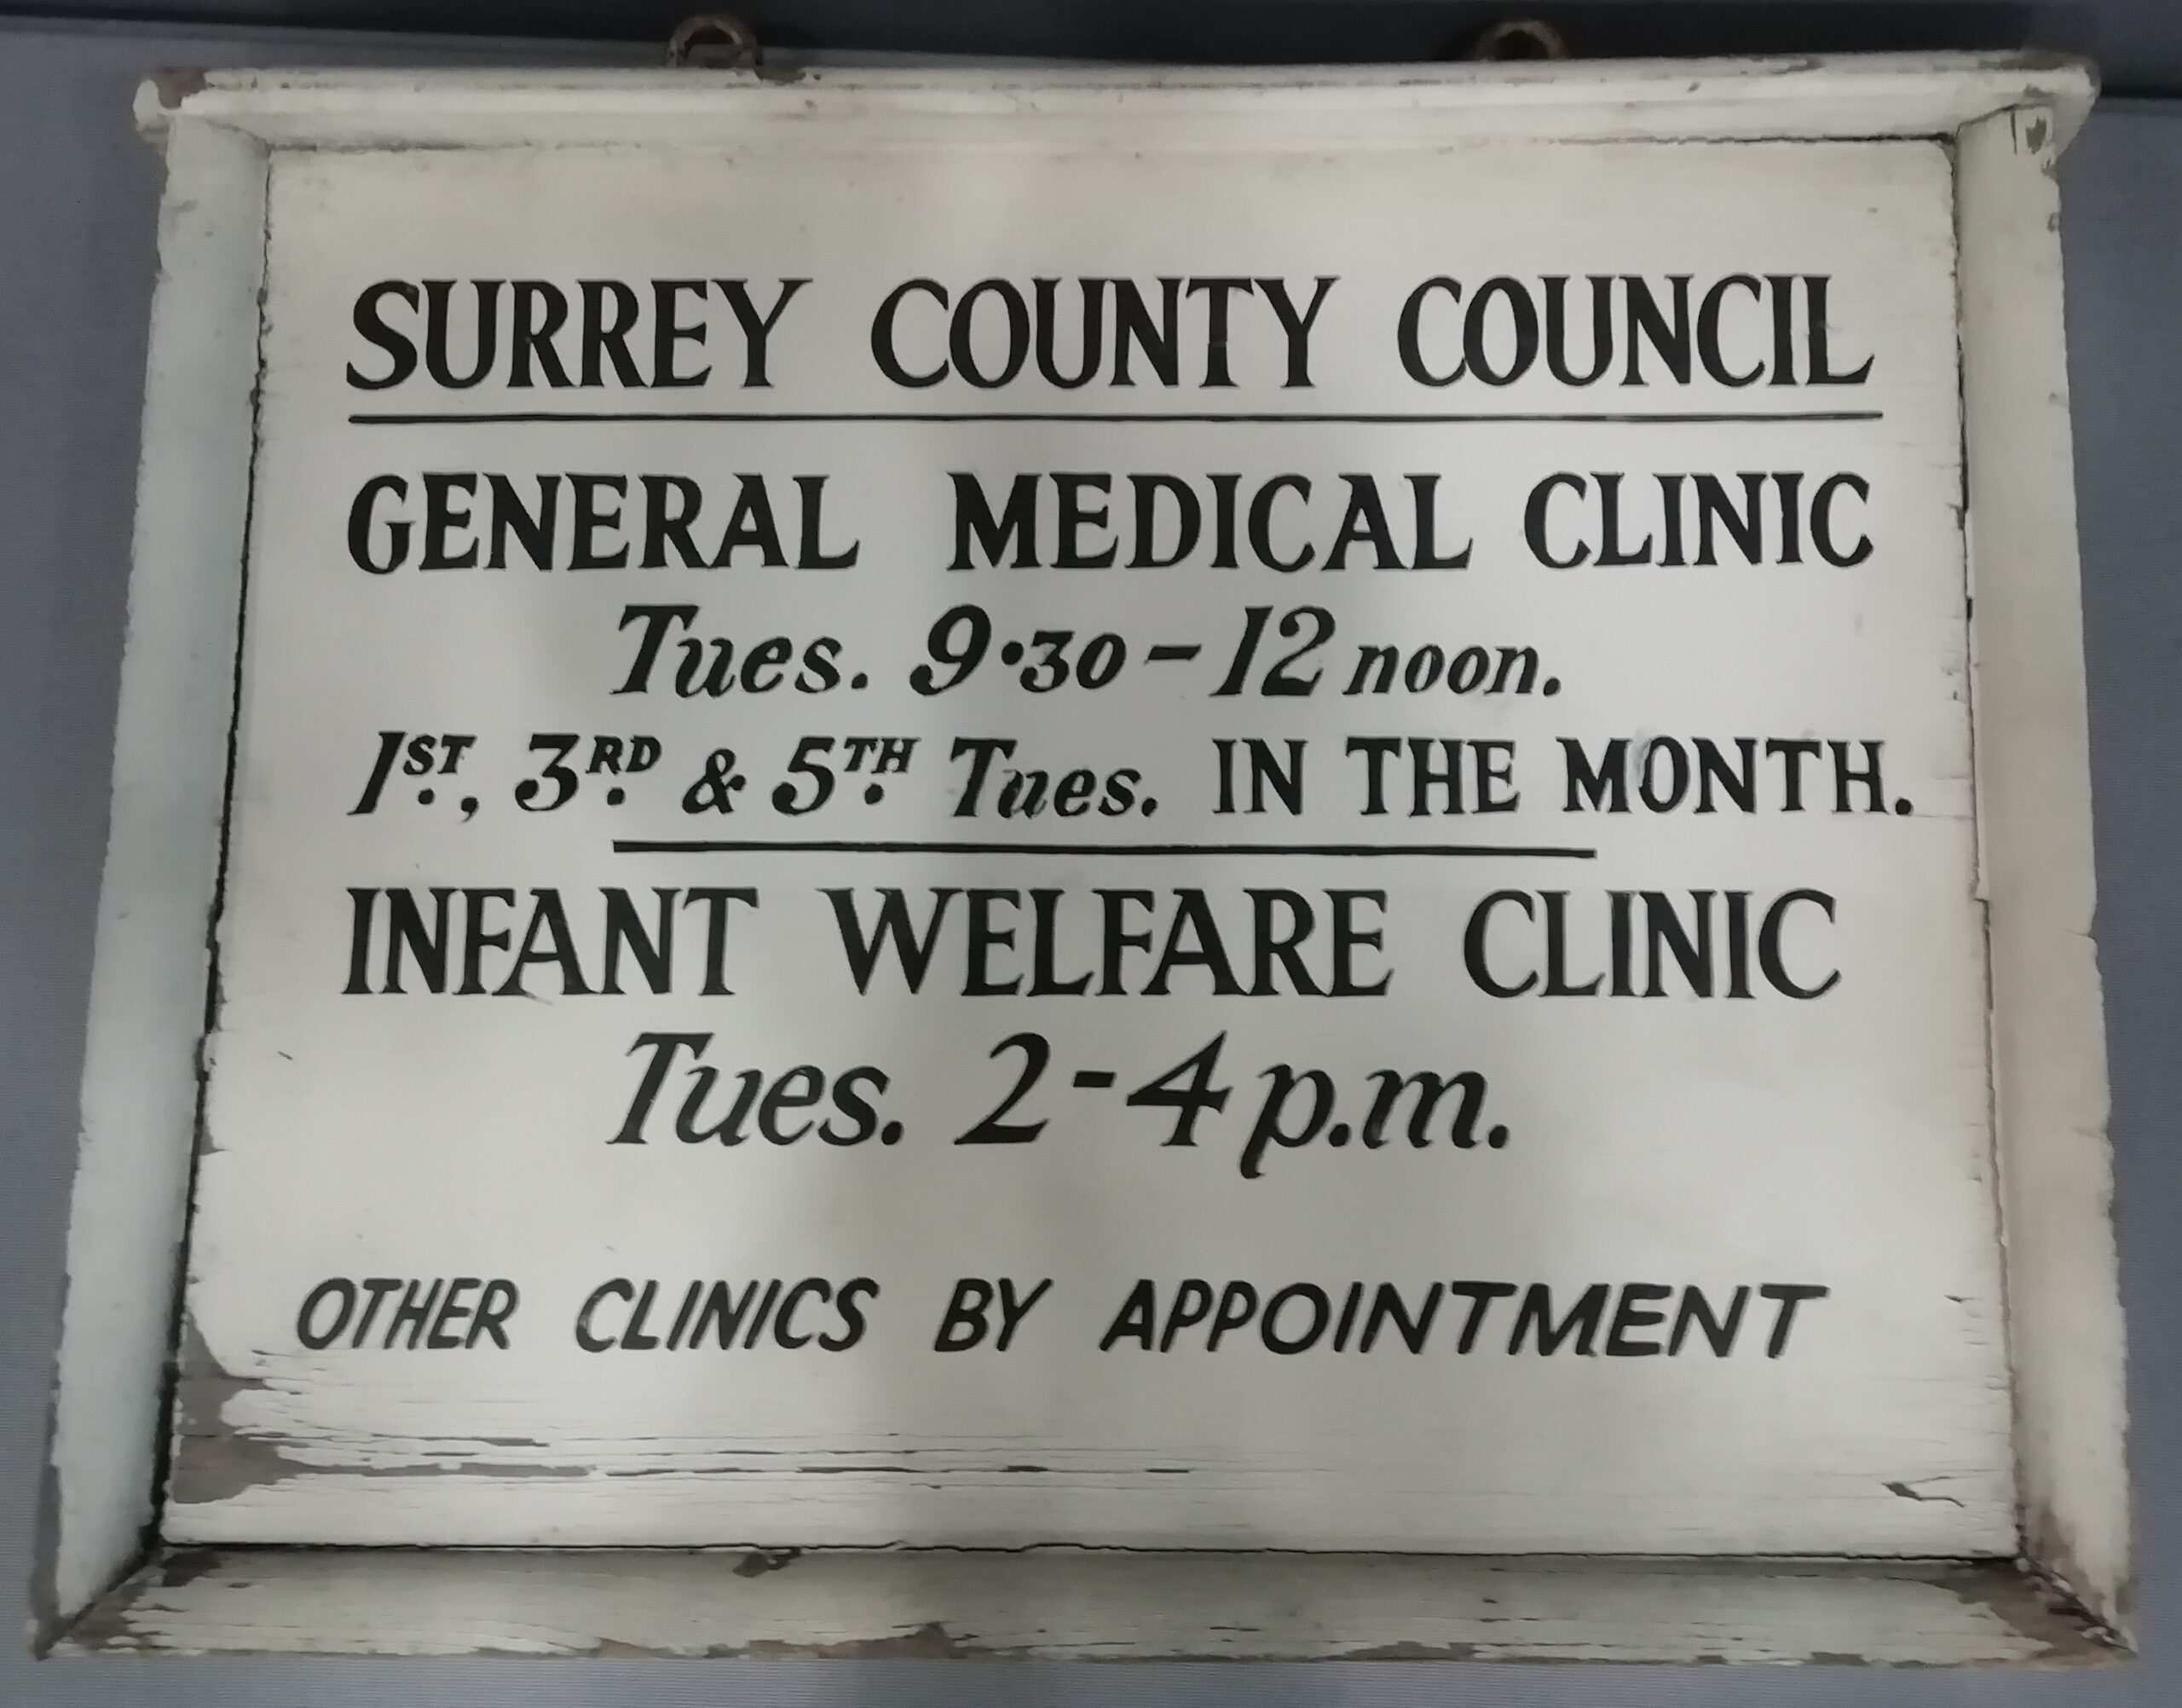 Sign removed from Locke-King Clinic after its closure in 1986-87.